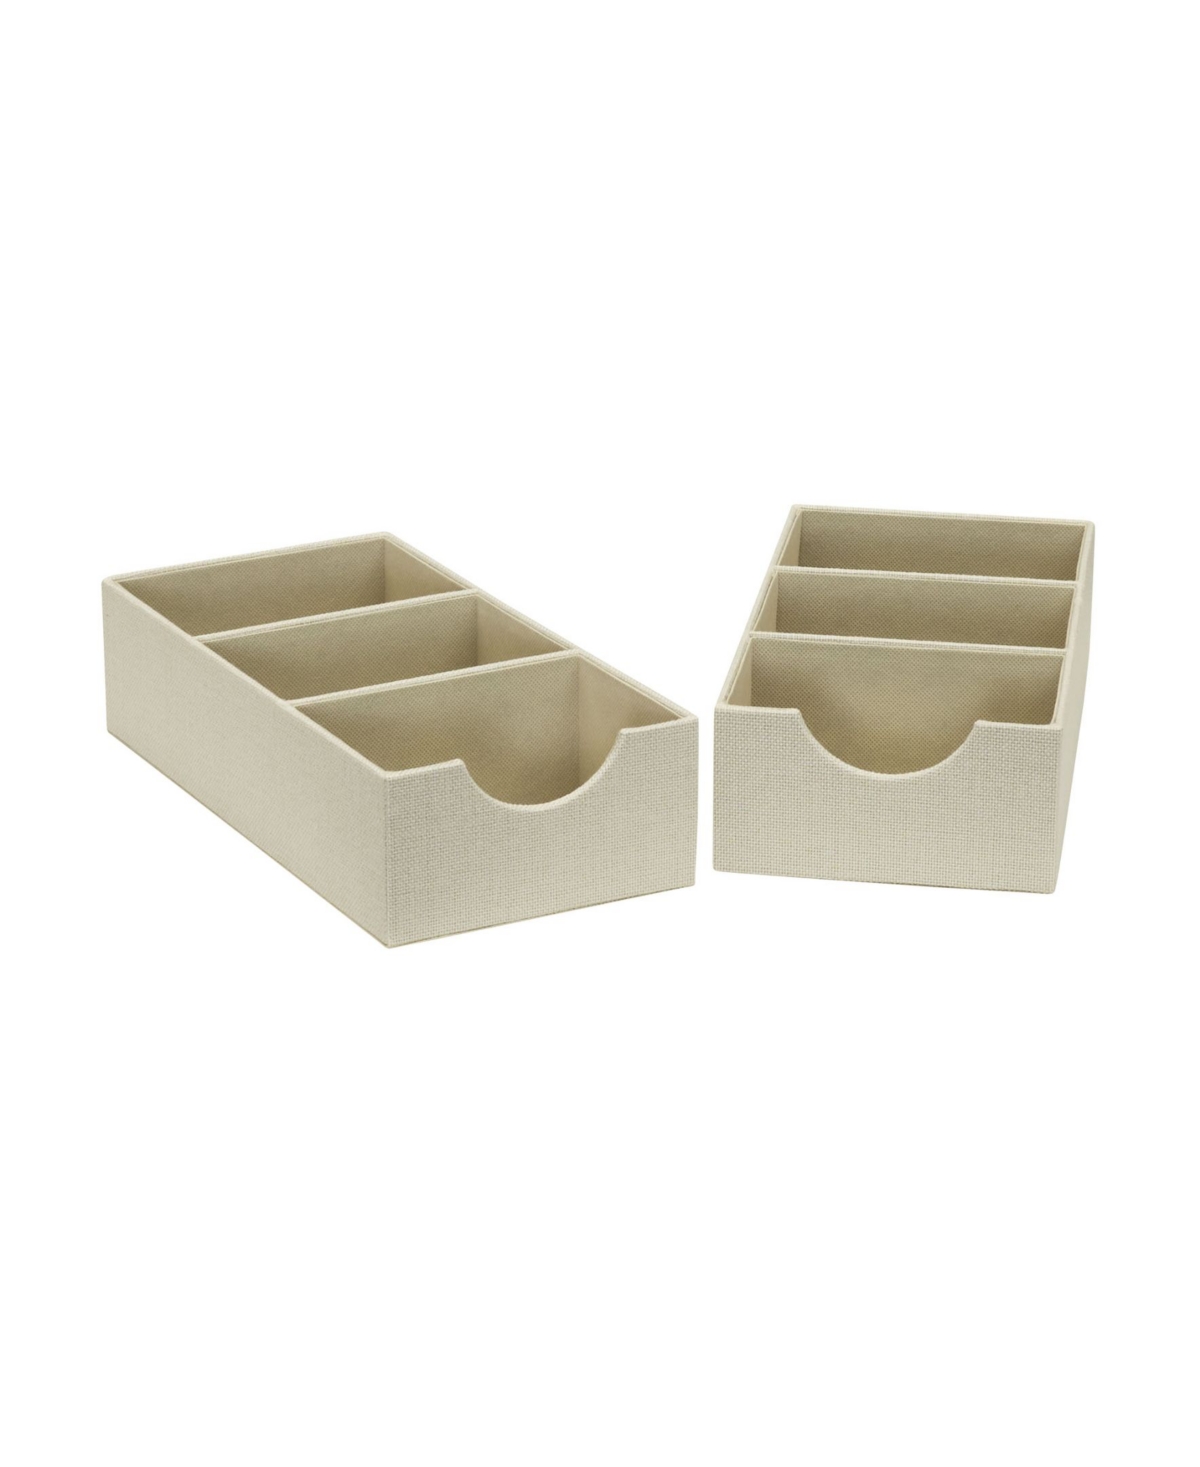 Household Essentials 3-compartment Drawer Organizers, Set Of 2 In Cream Linen